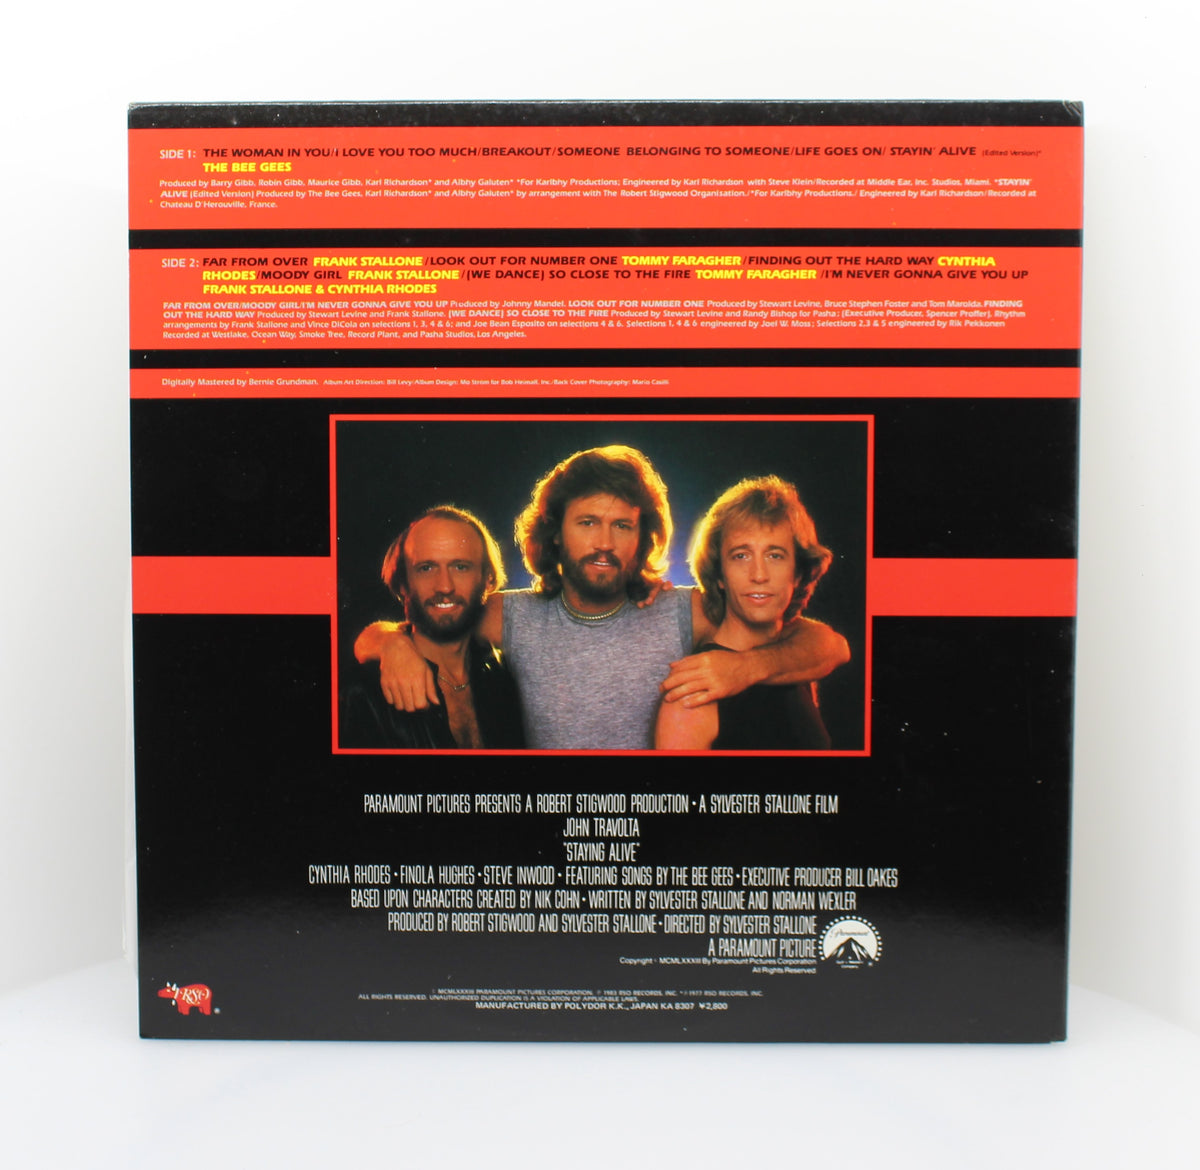 Bee Gees - Various – The Original Motion Picture Soundtrack - Staying Alive, Vinyl, LP, Album, Promo, White Label, Japan 1983